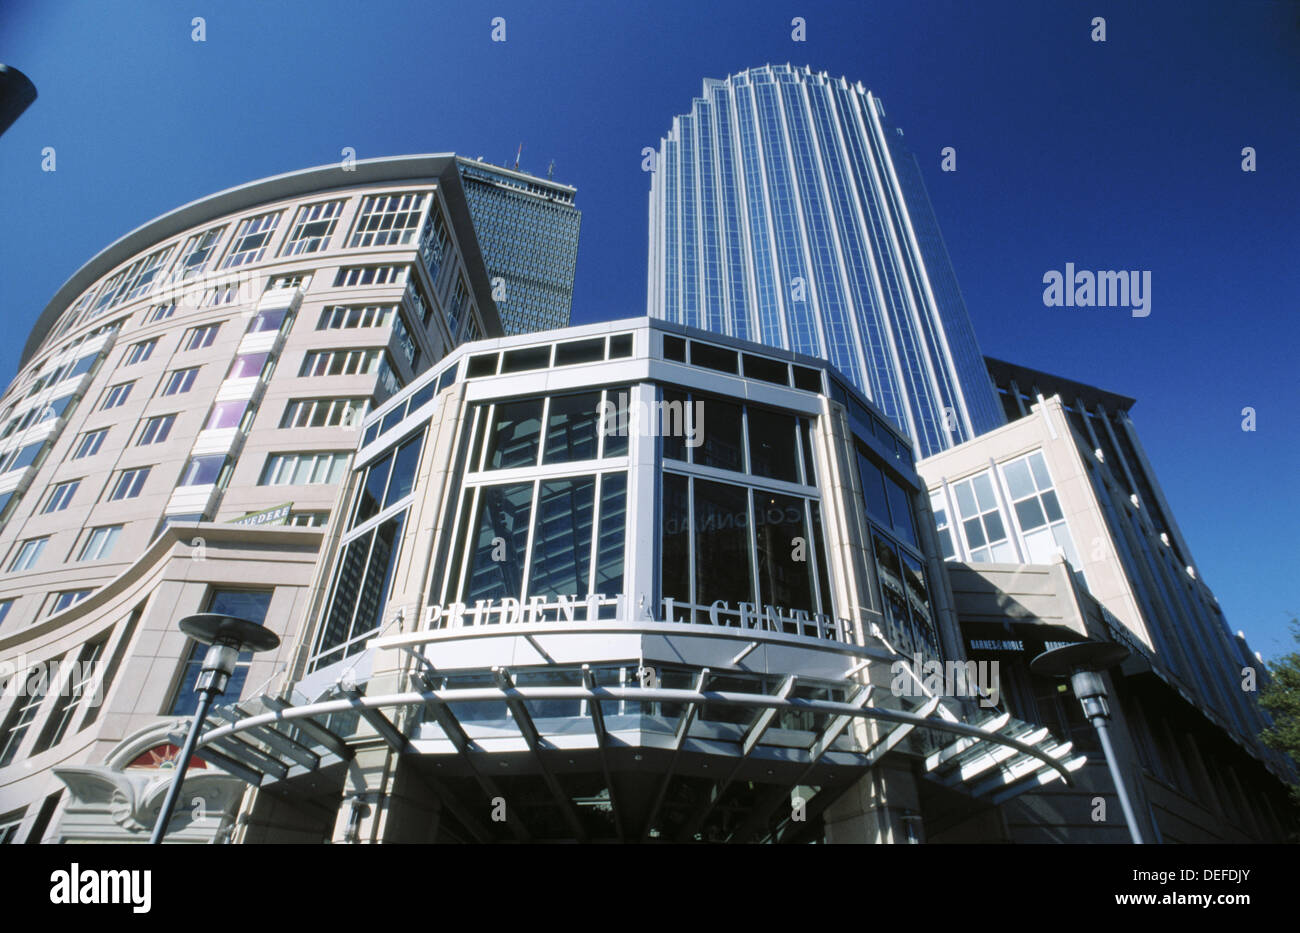 Prudential center shopping mall hi-res stock photography and images - Alamy